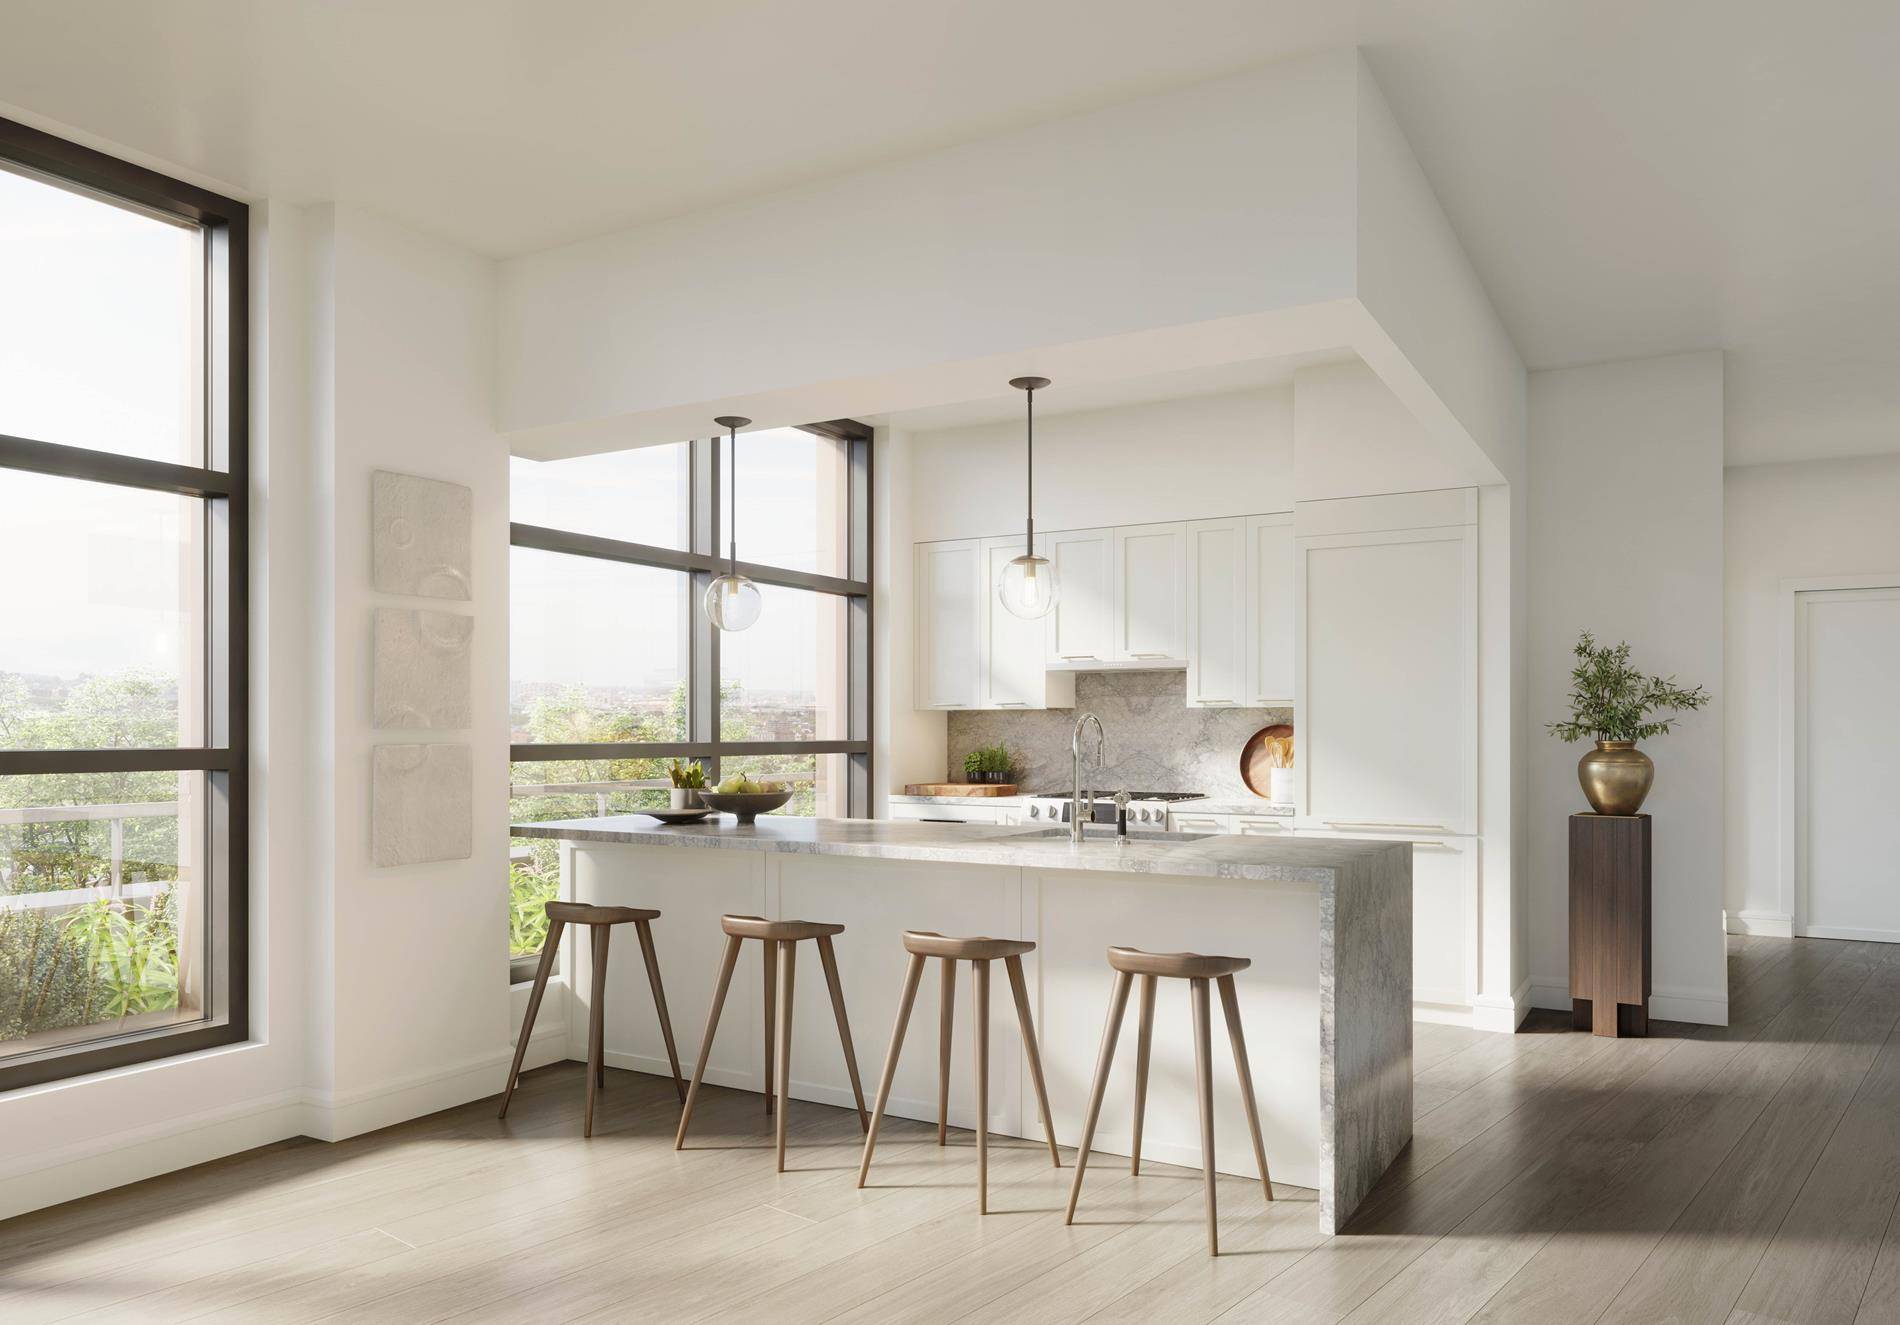 Rendering ImagesIntroducing Residence 10B at BLVD, a stunning two bedroom, two bathroom condominium with balcony that offers an unparalleled living experience in the heart of Forest Hills.